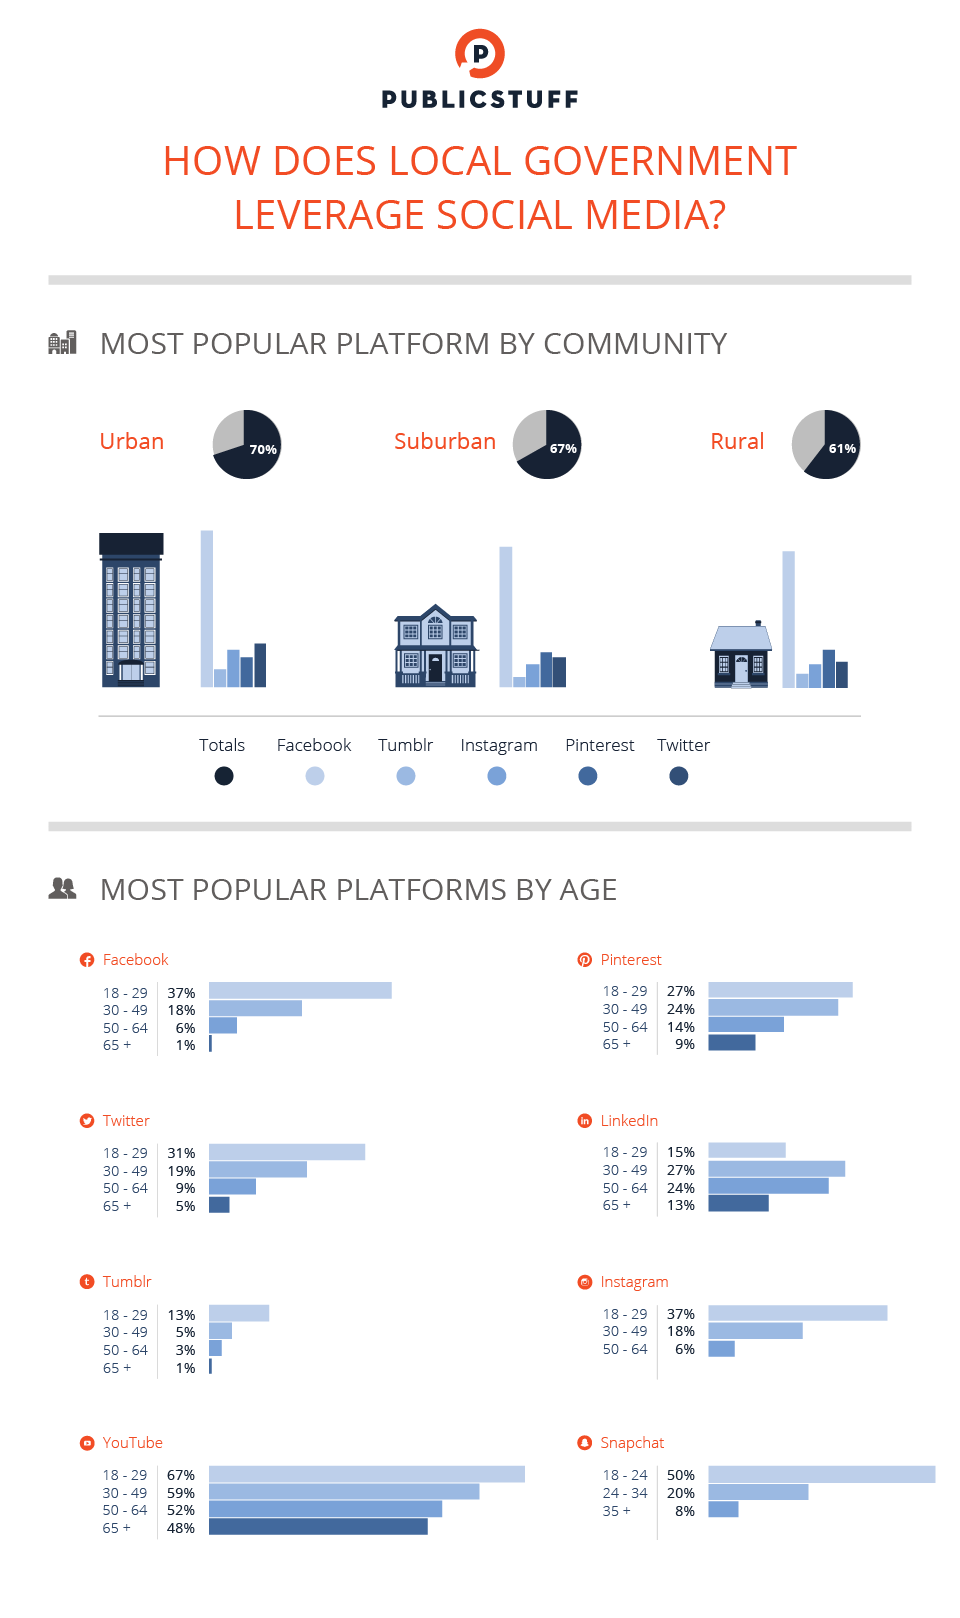 Social Media Use by Community and Age